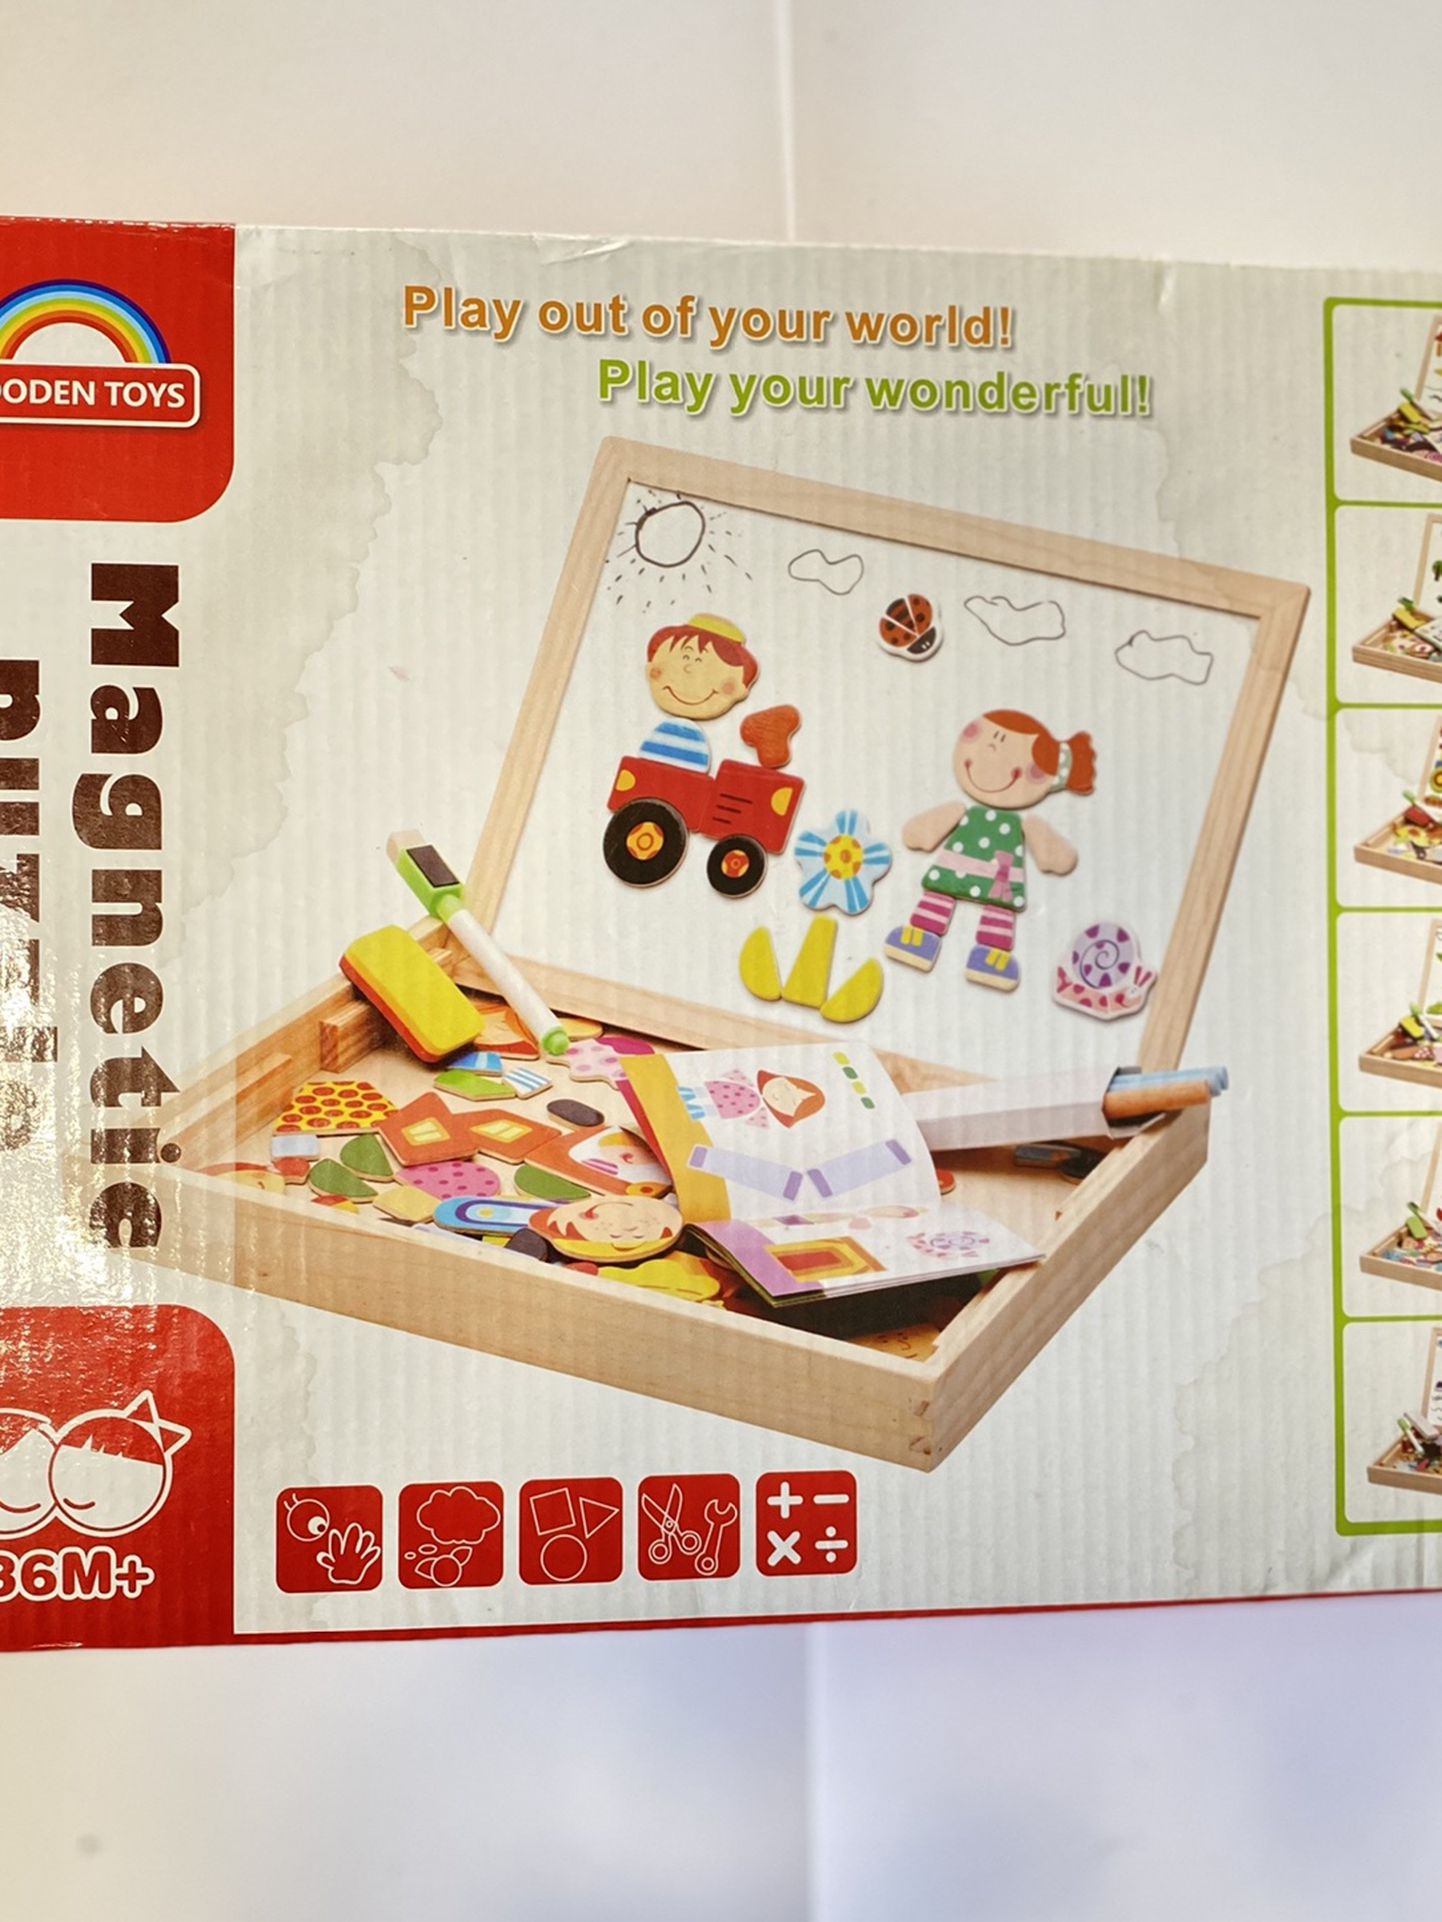 Wooden Toys Magnetic Puzzles Kids Wooden Games 109 Pieces Double Side Education Learning Toys for Children